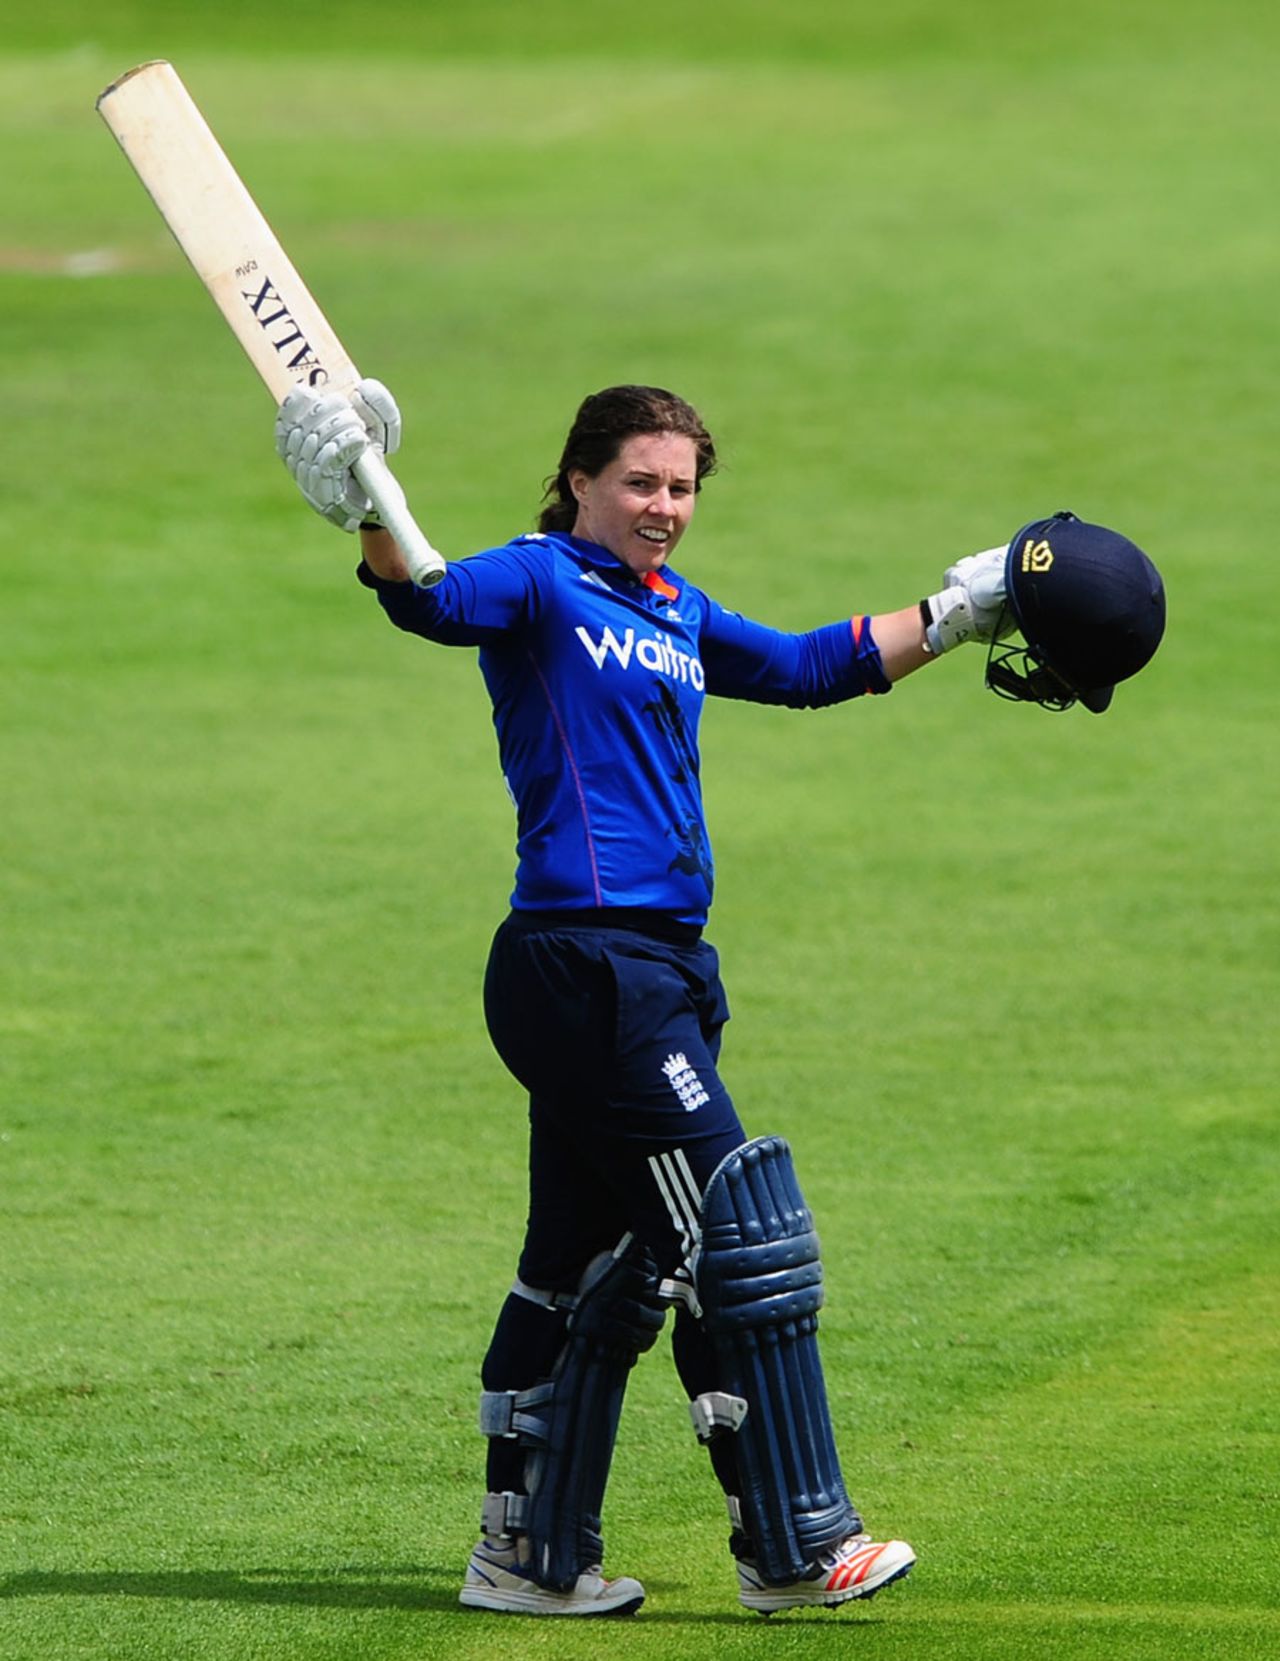 Tammy Beaumont made her second successive hundred, England v Pakistan, 3rd women's ODI, Taunton, June 27, 2016